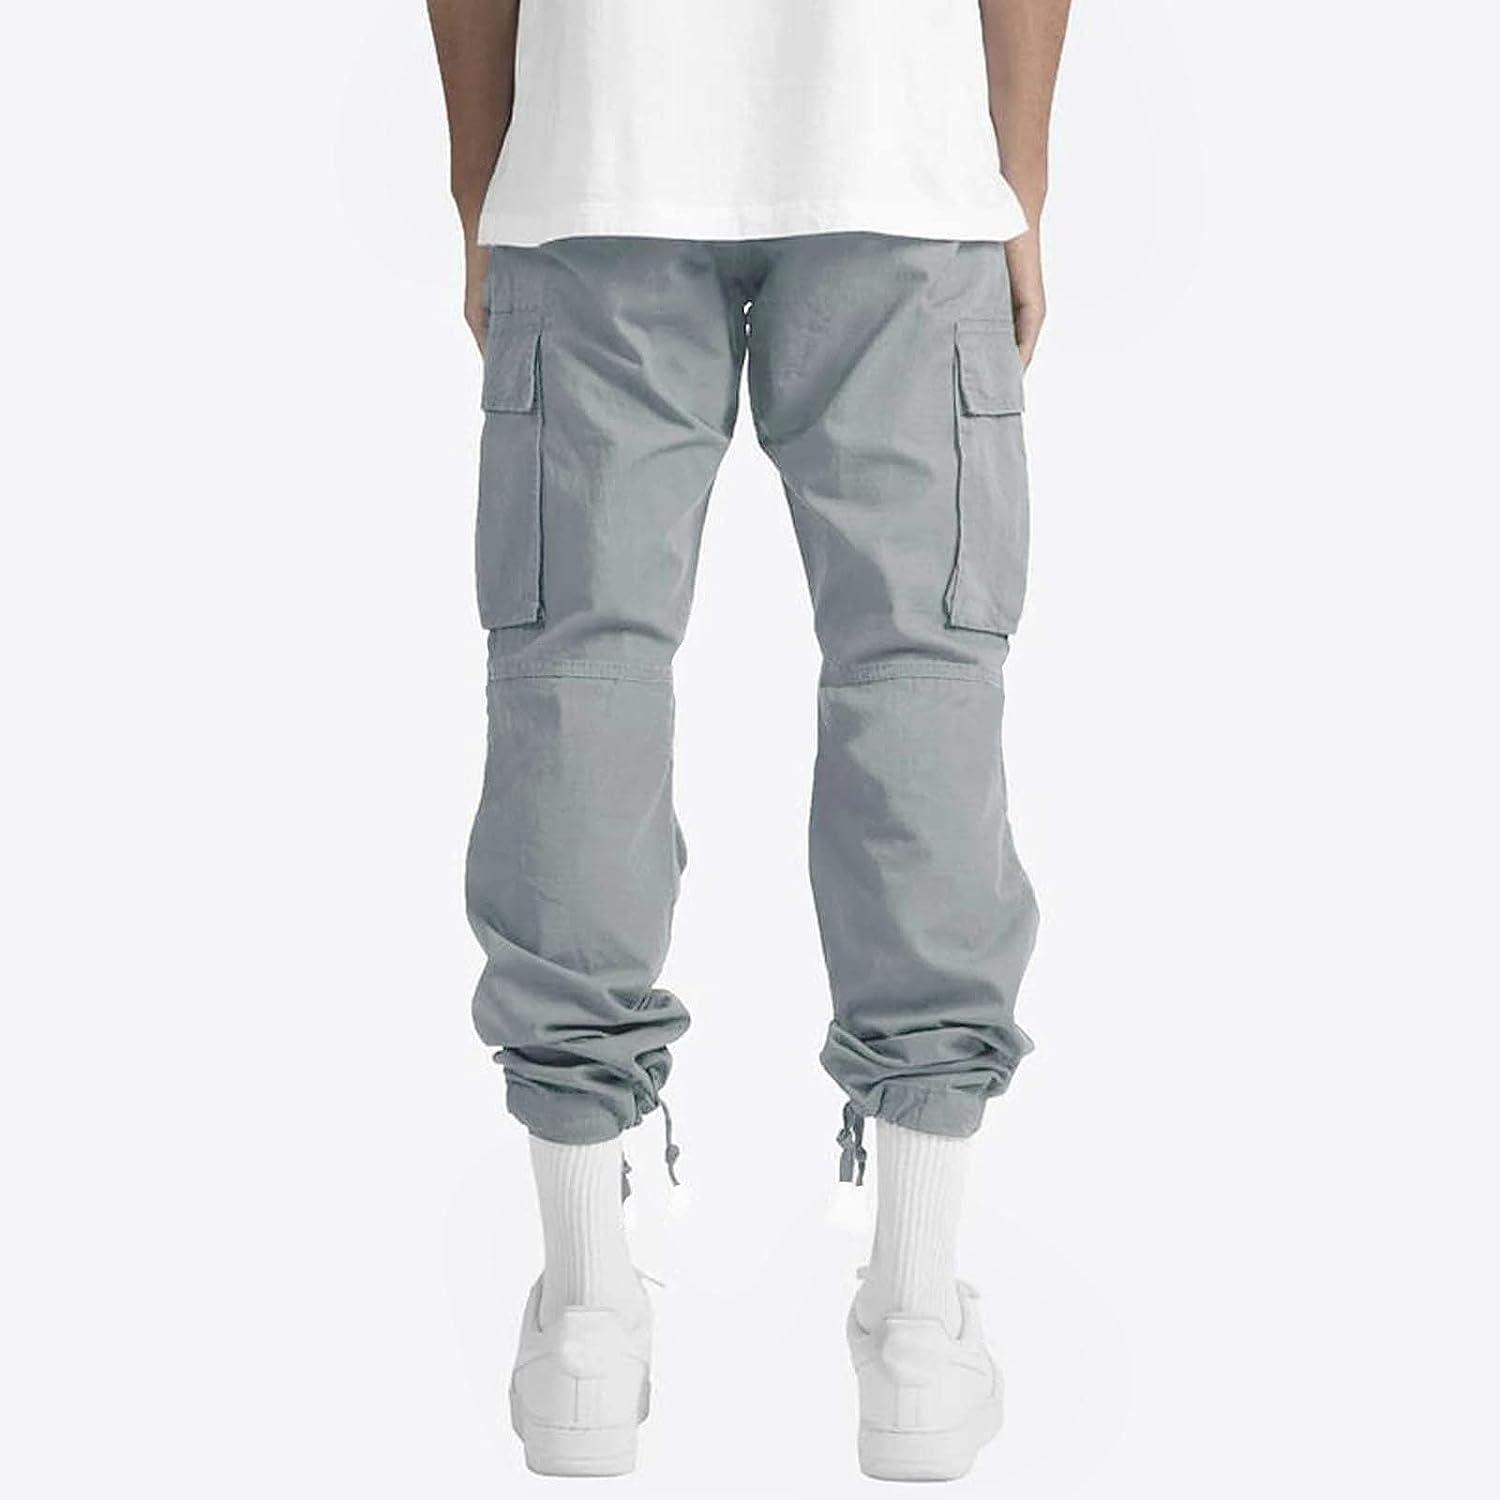 Mens Cargo Pants Plus Size Casual Outdoor Gym Pants with Pockets Solid  Color Drawstring Trousers Streetwear 1-gray Medium